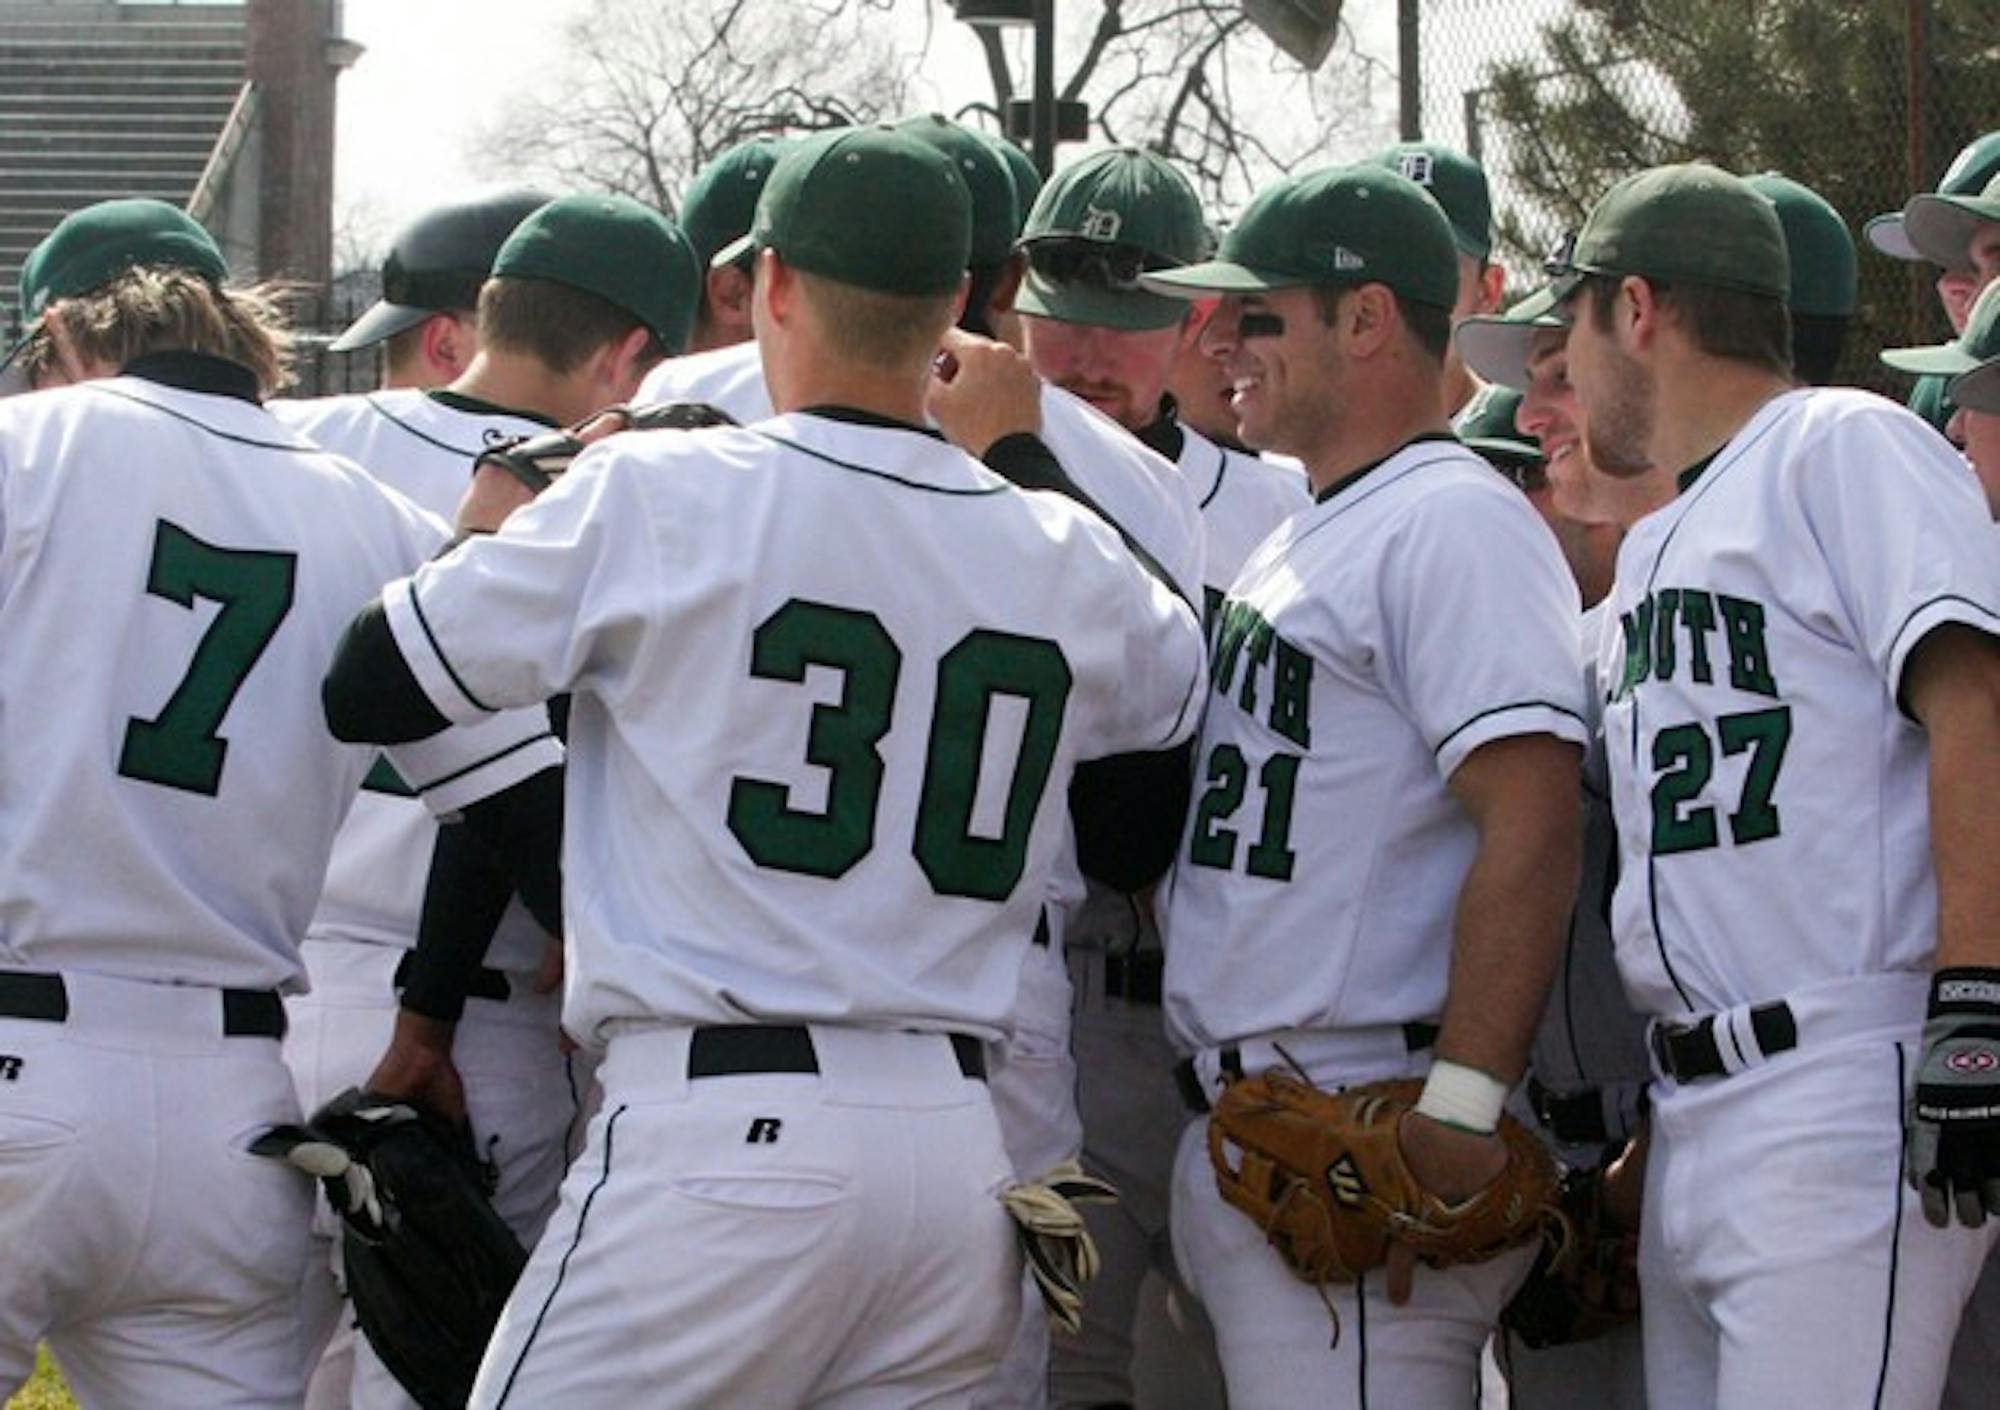 Dartmouth leads the Ivy League with a .318 team batting average and has a conference-high 10.91 hits per game.